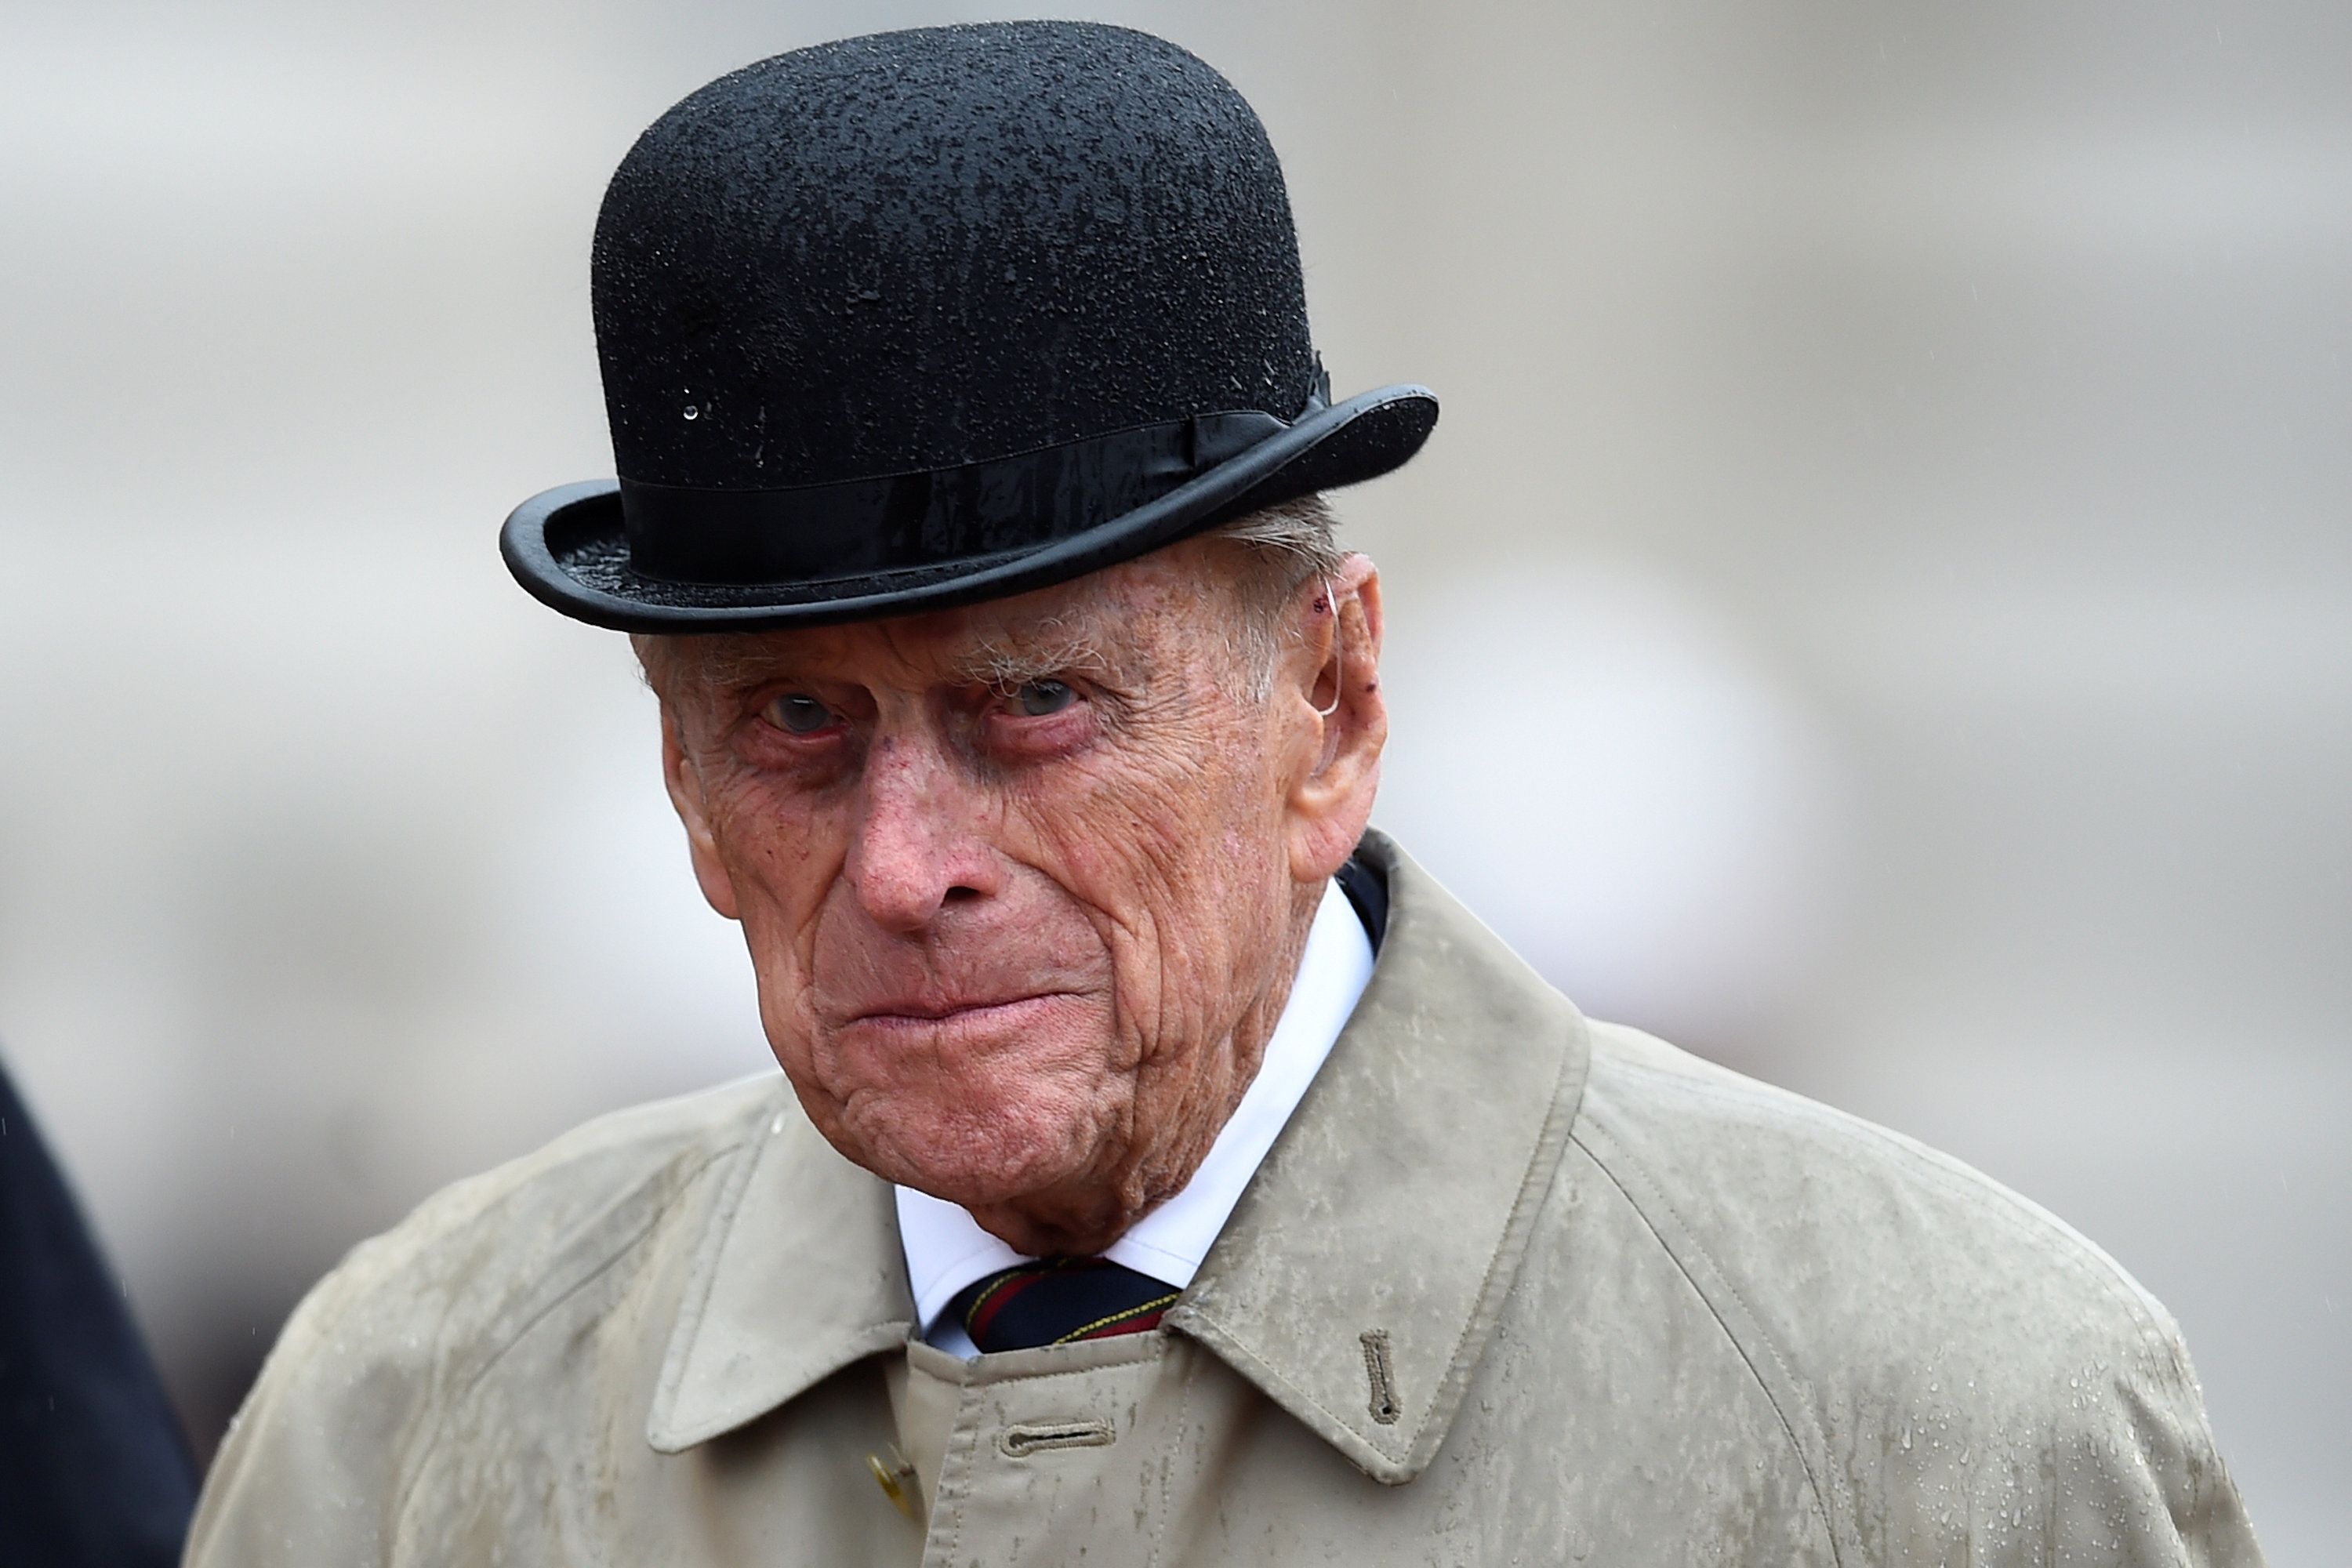 prince Philip, Duke of Edinburgh as Captain General, Royal Marines, making his final individual public engagement while attending a parade to mark the finale of the 1664 Global Challenge on the Buckingham Palace Forecourt in London, England | Photo: Hannah McKay - WPA Pool/Getty Images